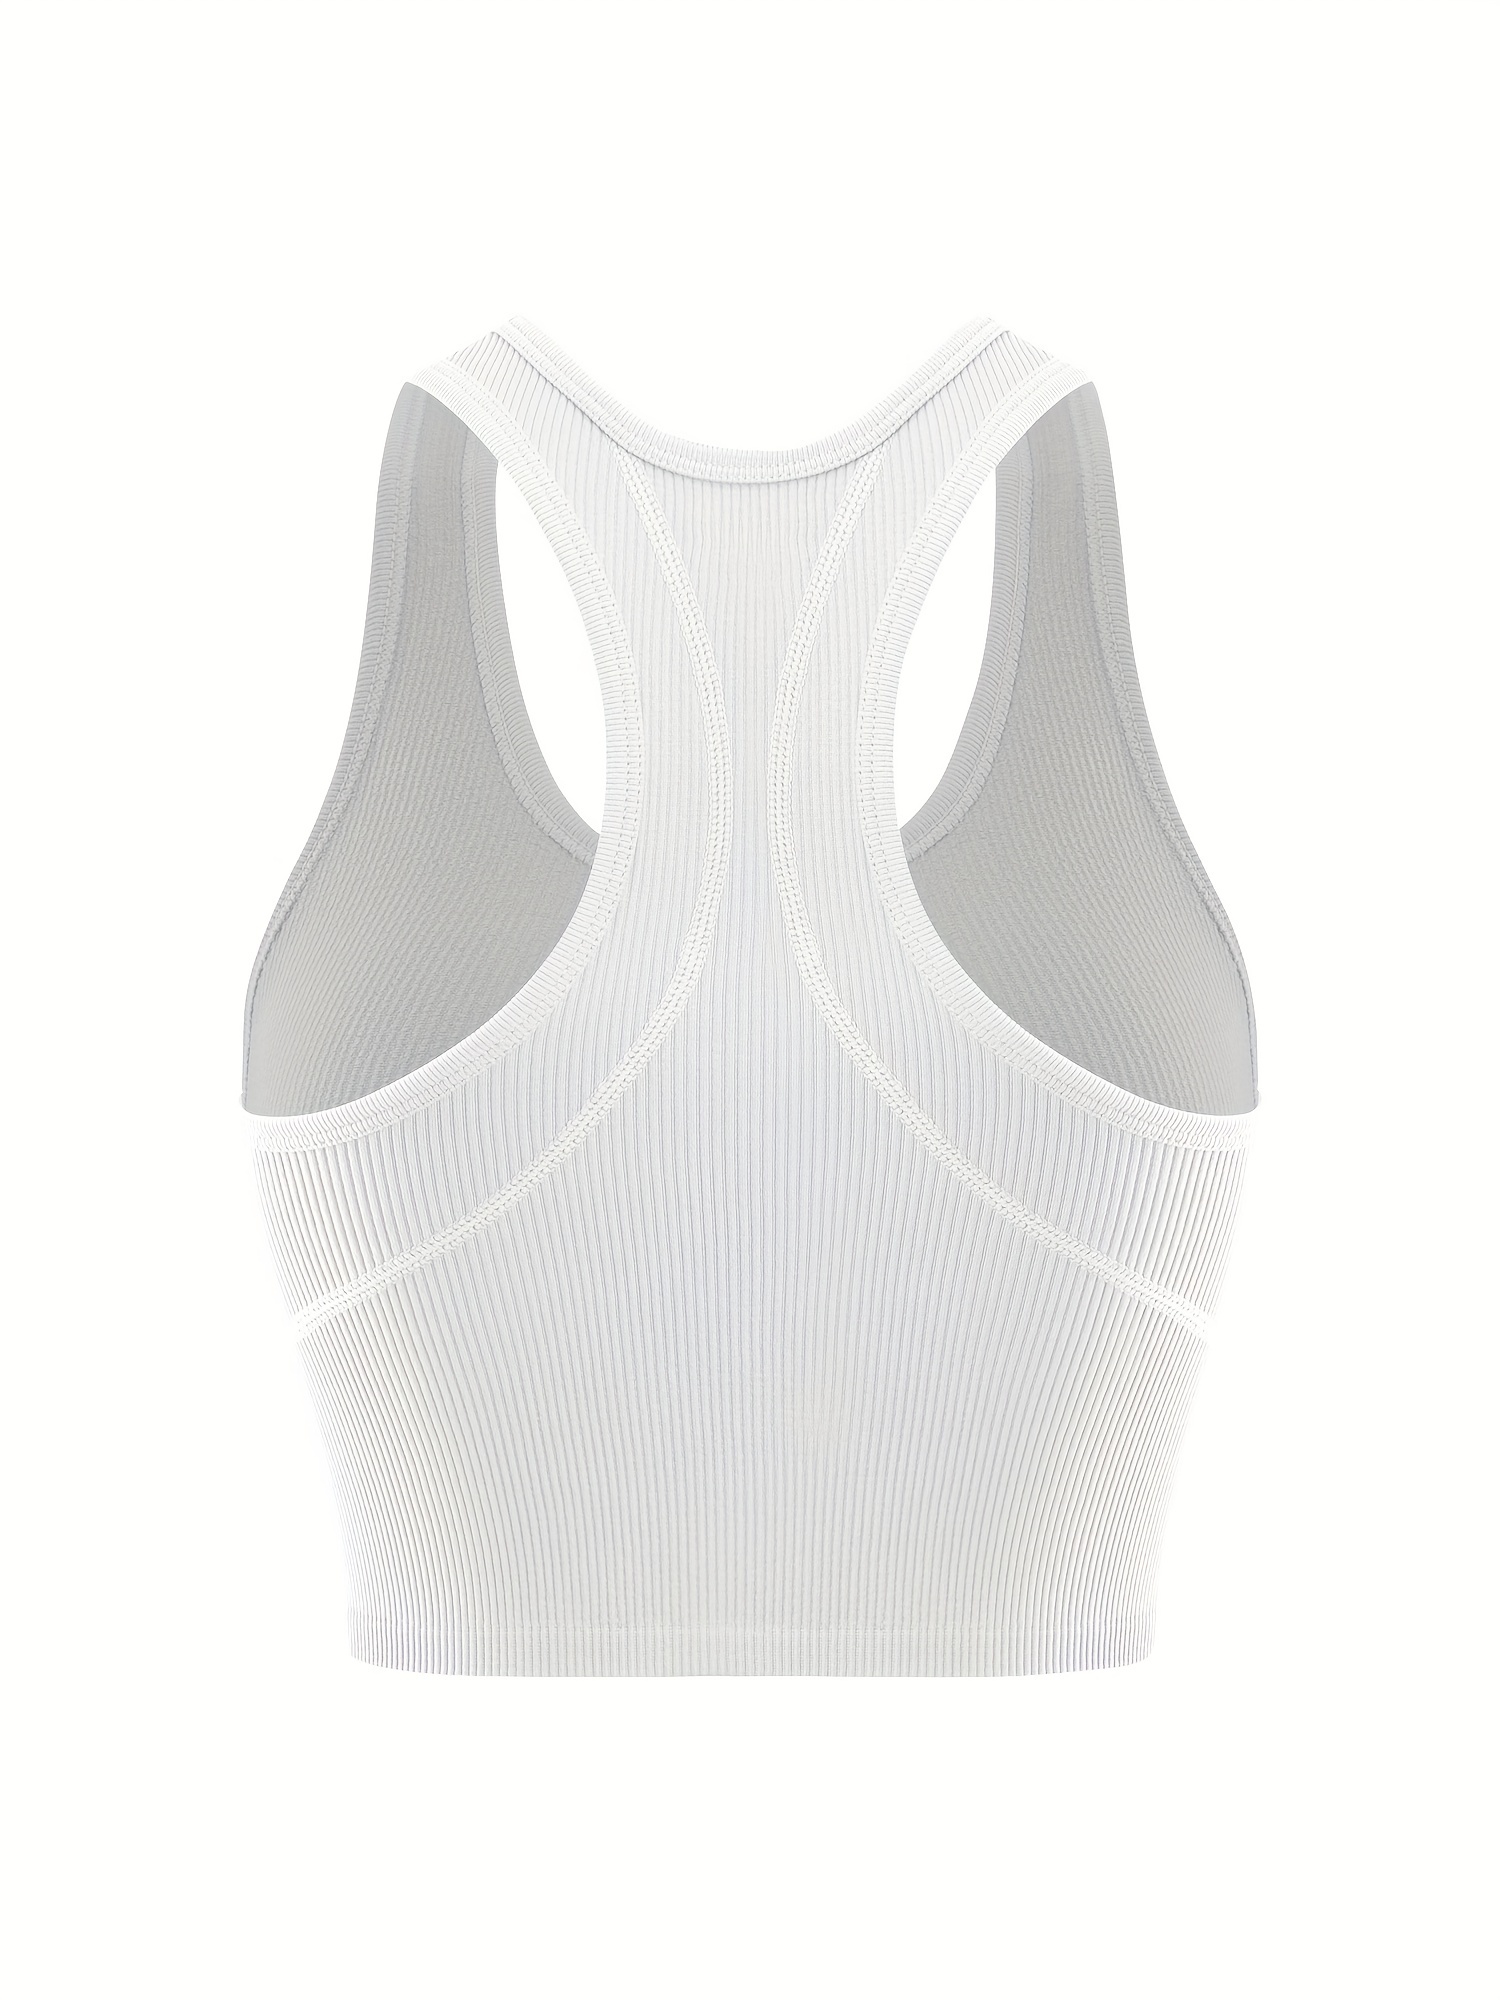 EHQJNJ Tank Top with Built in Bra for Women Women's Simple Knot Crop  Knitted Vest Top Womens Camisole Tank Tops Nylon/Spandex White Tank Tops  for Women 2024 Built in Bra Crop 